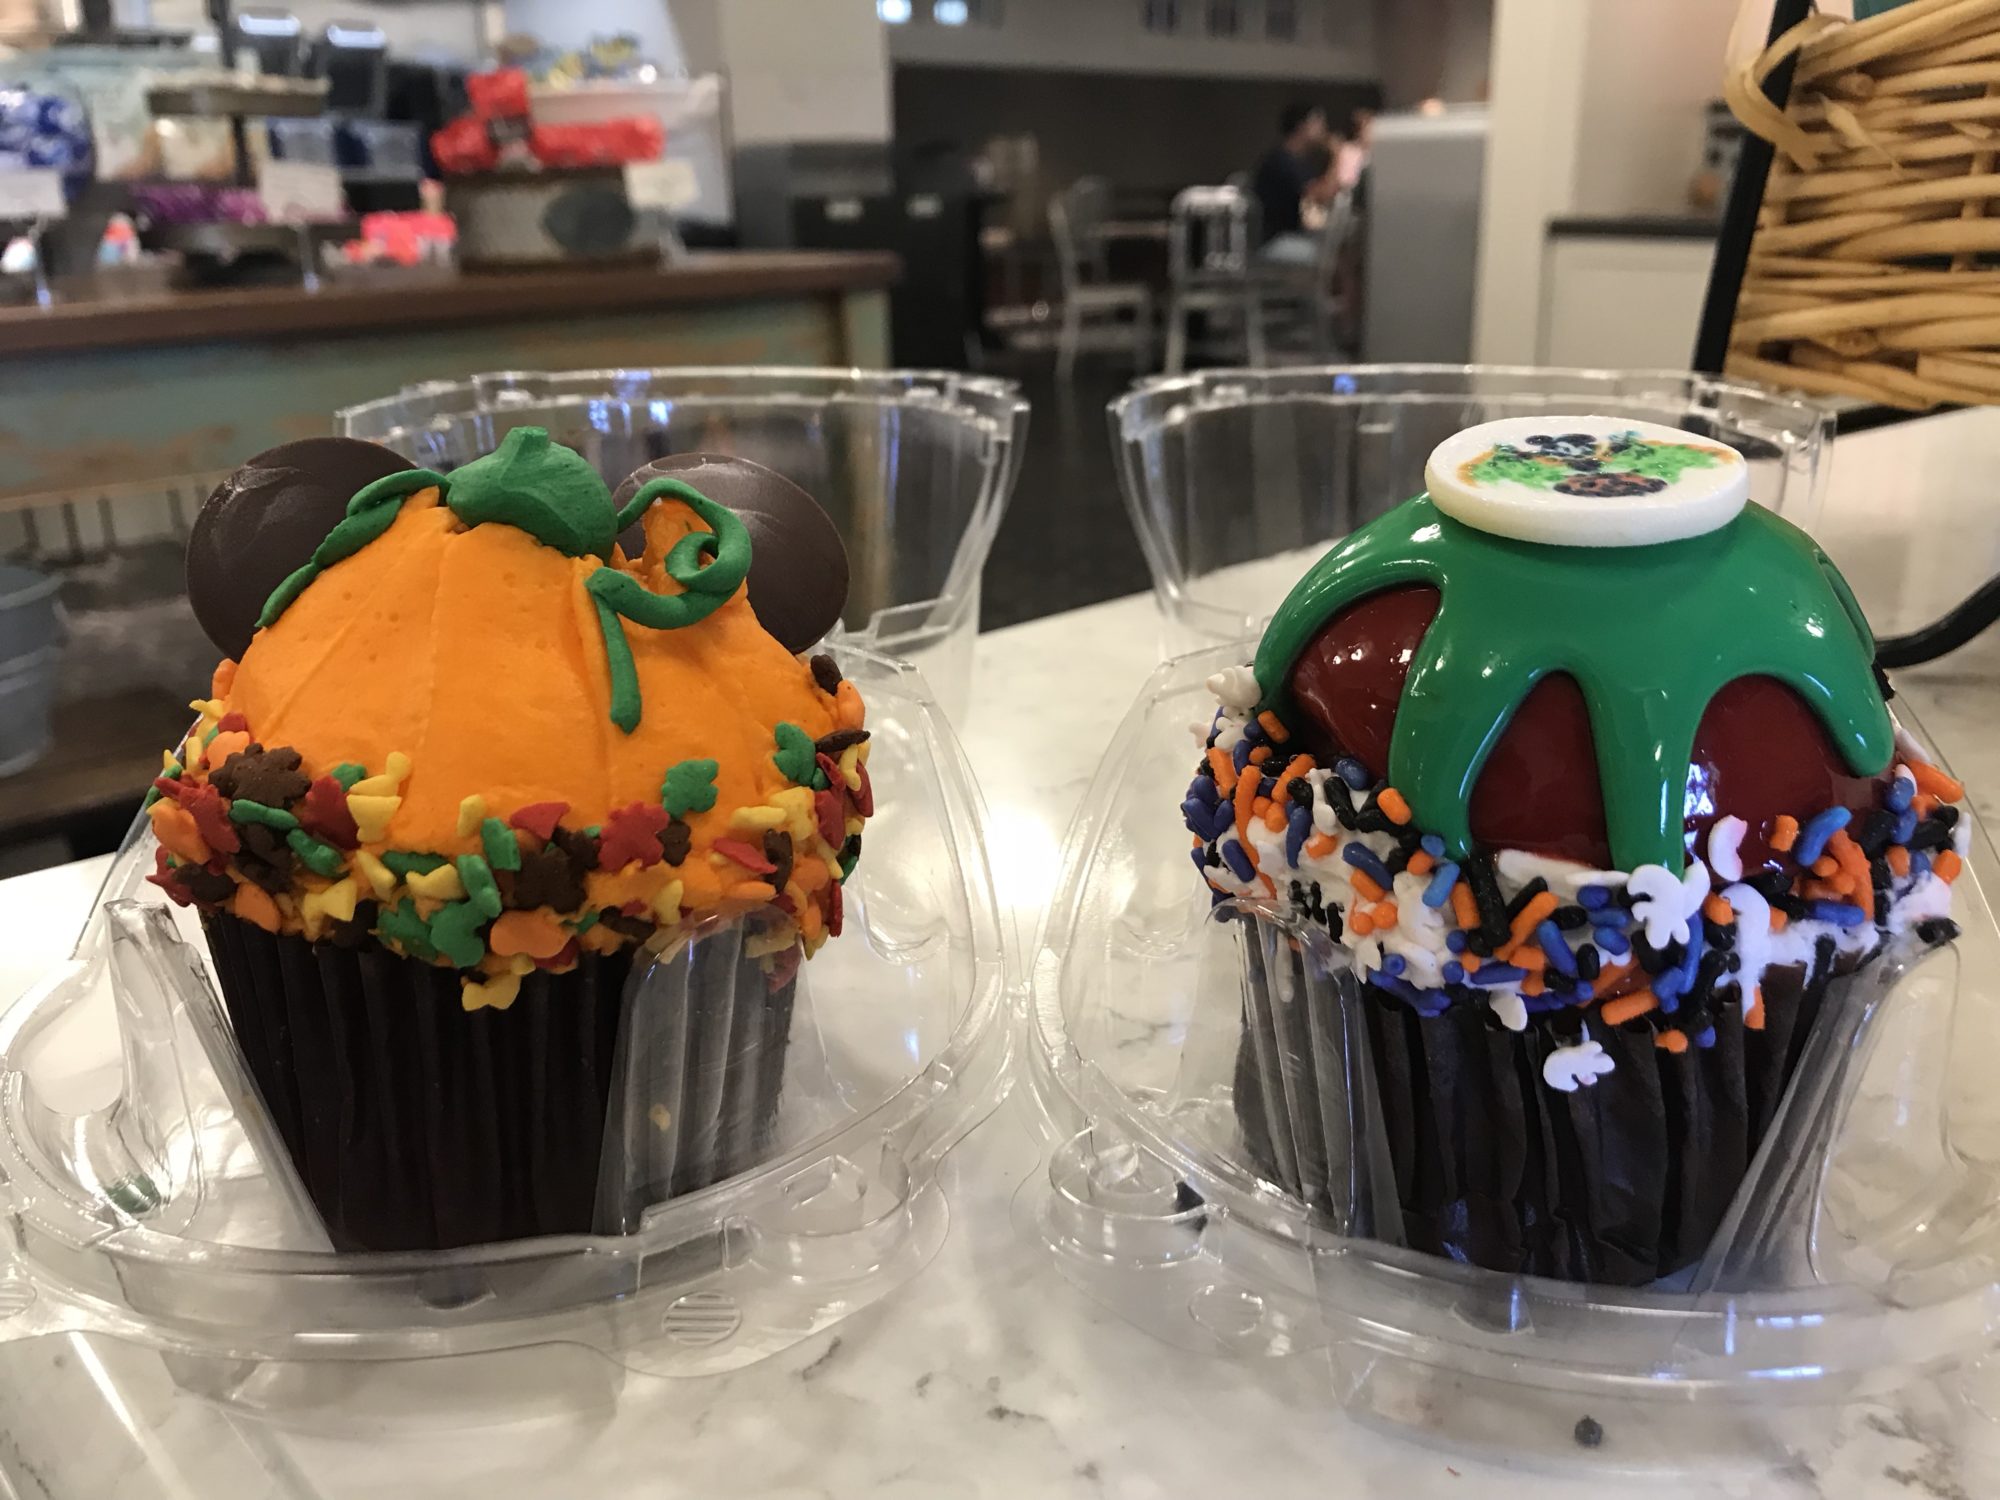 Halloween Inspired Cupcakes Arrive at The Yacht Club